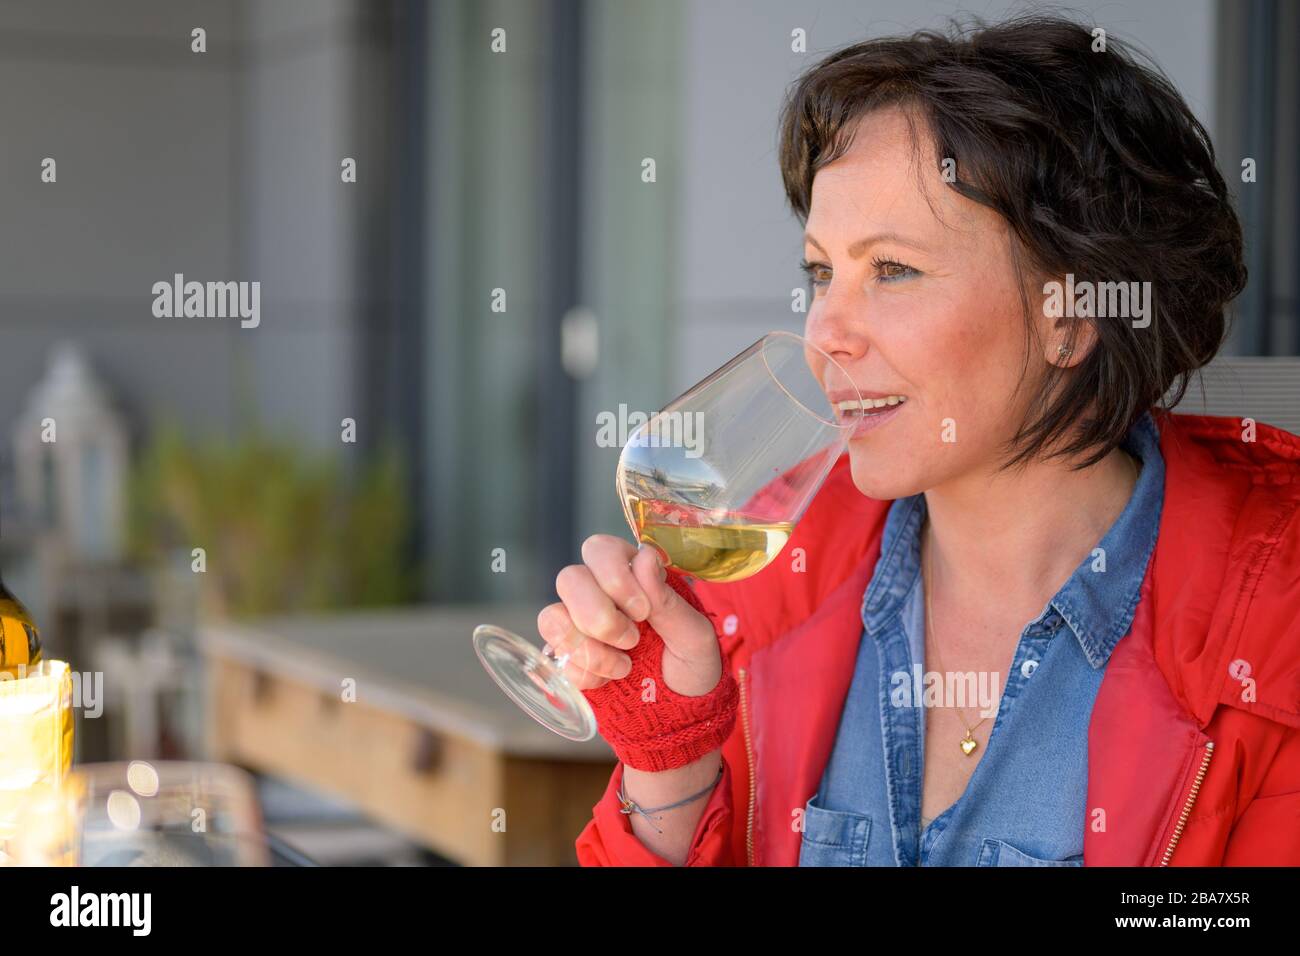 Trendy woman sipping a glass of white wine as she sits at an open air restaurant table in a close up profile view with thoughtful expression Stock Photo